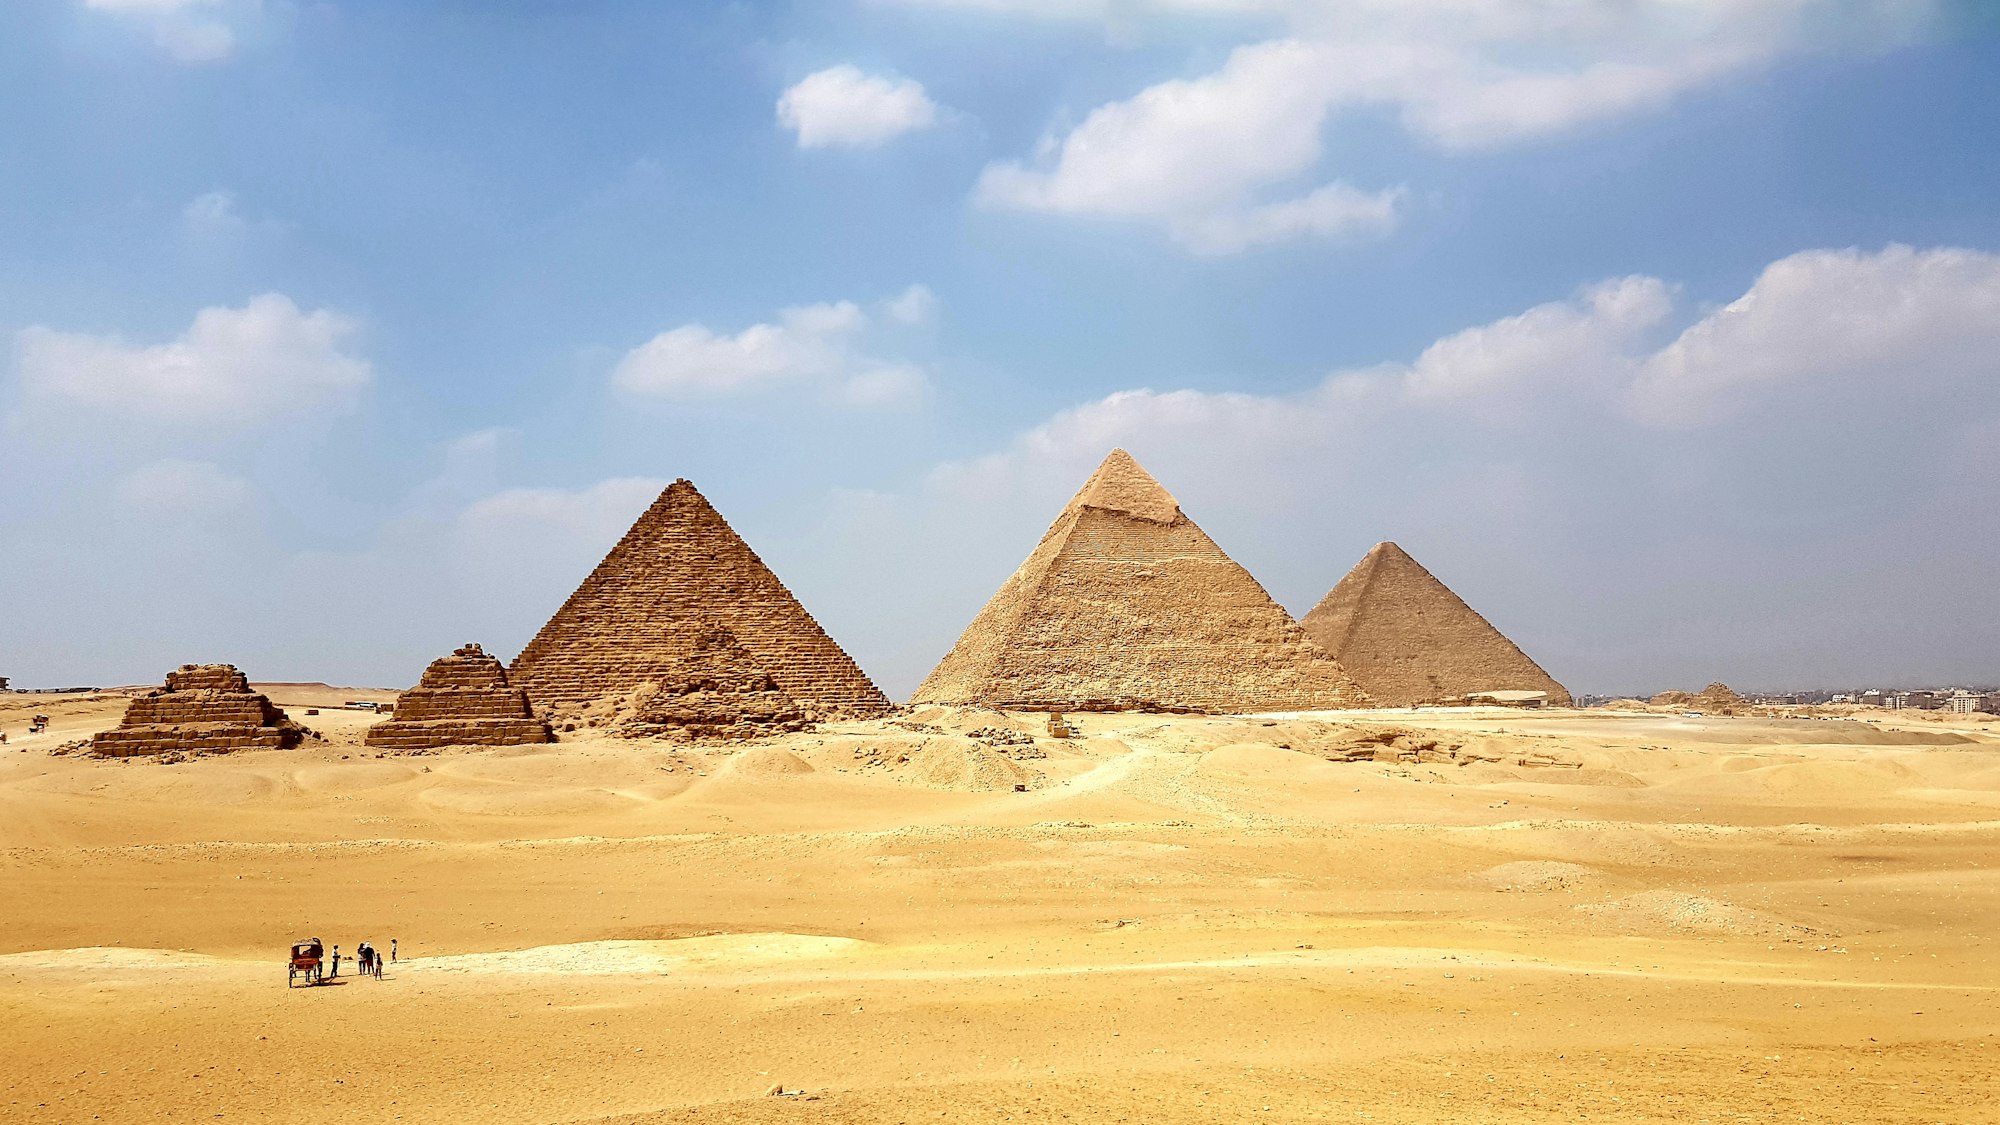 The great Pyramids of Giza